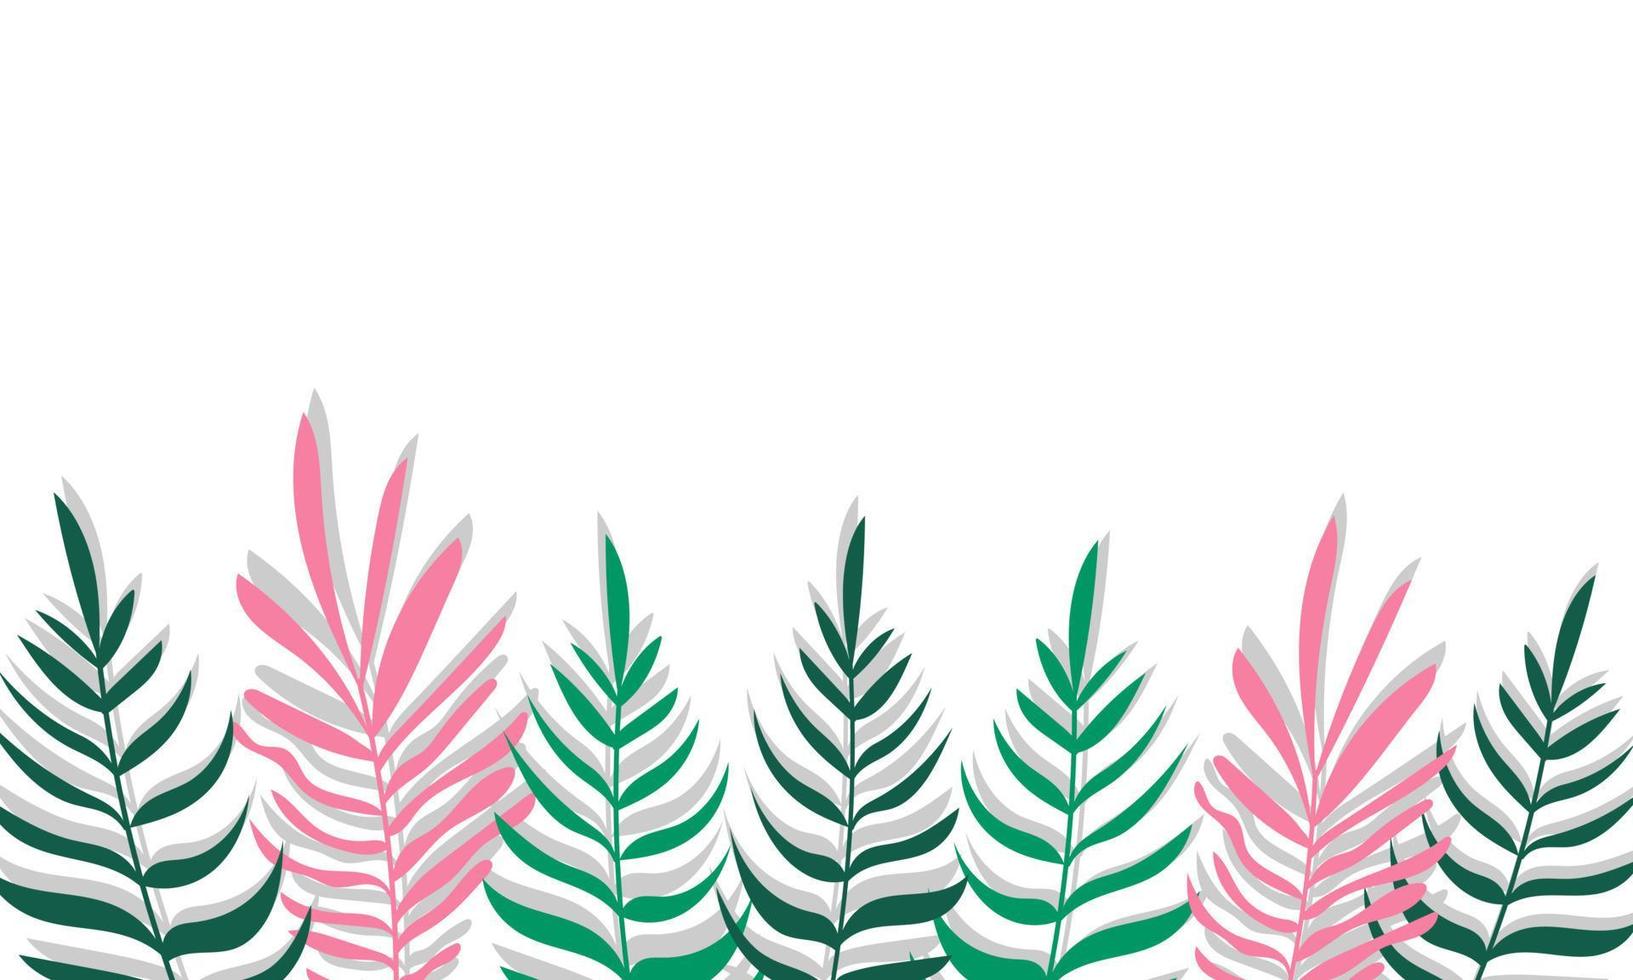 Plants minimalist vector banner. Hand drawn floral, grass, branches, leaves on a white background. Green simple horizontal pattern. Simple flat style. All elements are isolated and editable